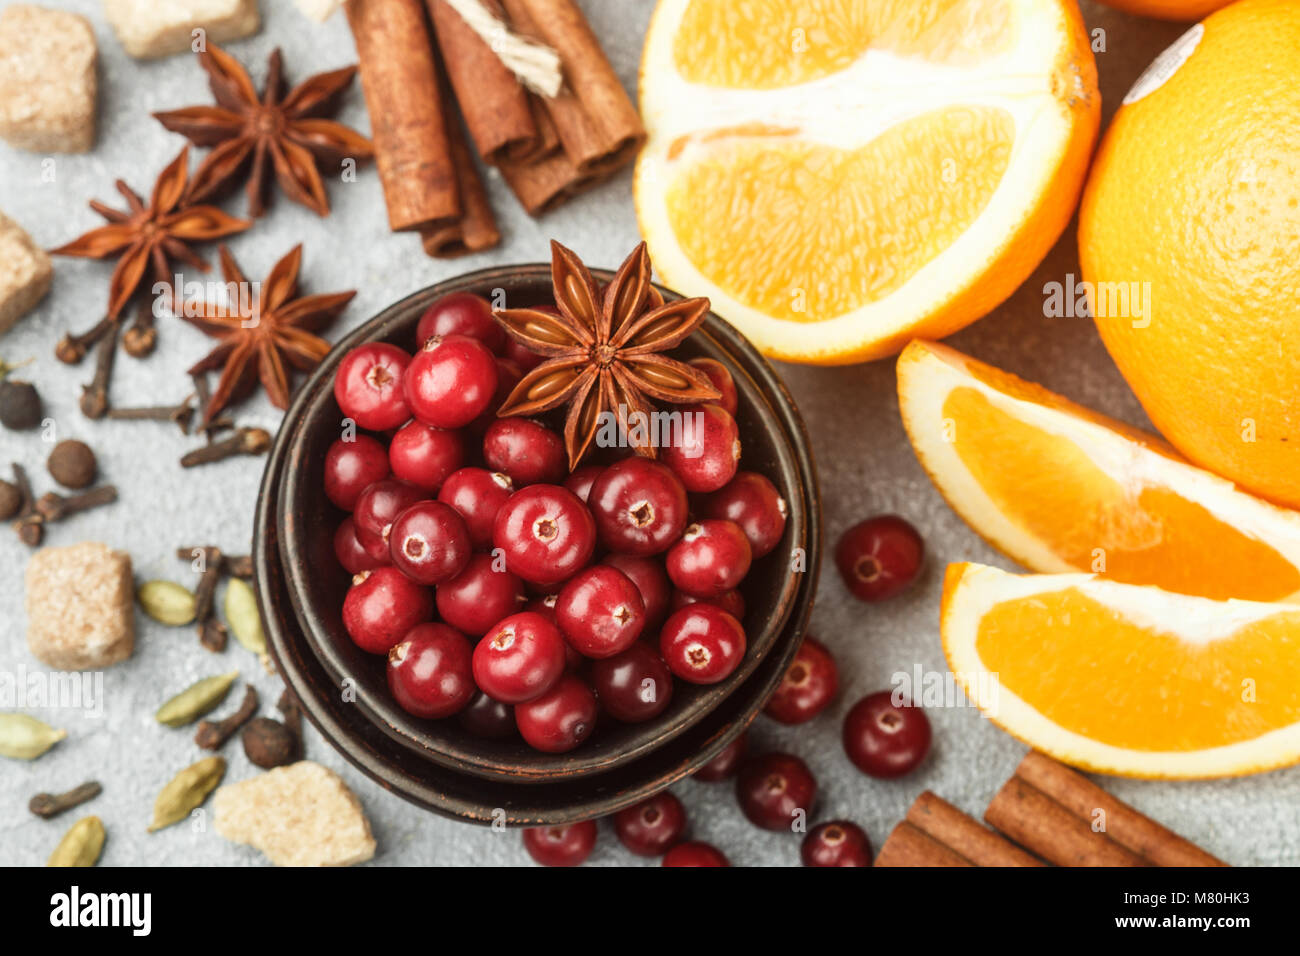 Ingredients for cooking traditional spicy winter drinks - cranberry, citrus, cinnamon, cardamom, star anise, cloves, pepper. Non-alcoholic mulled wine Stock Photo